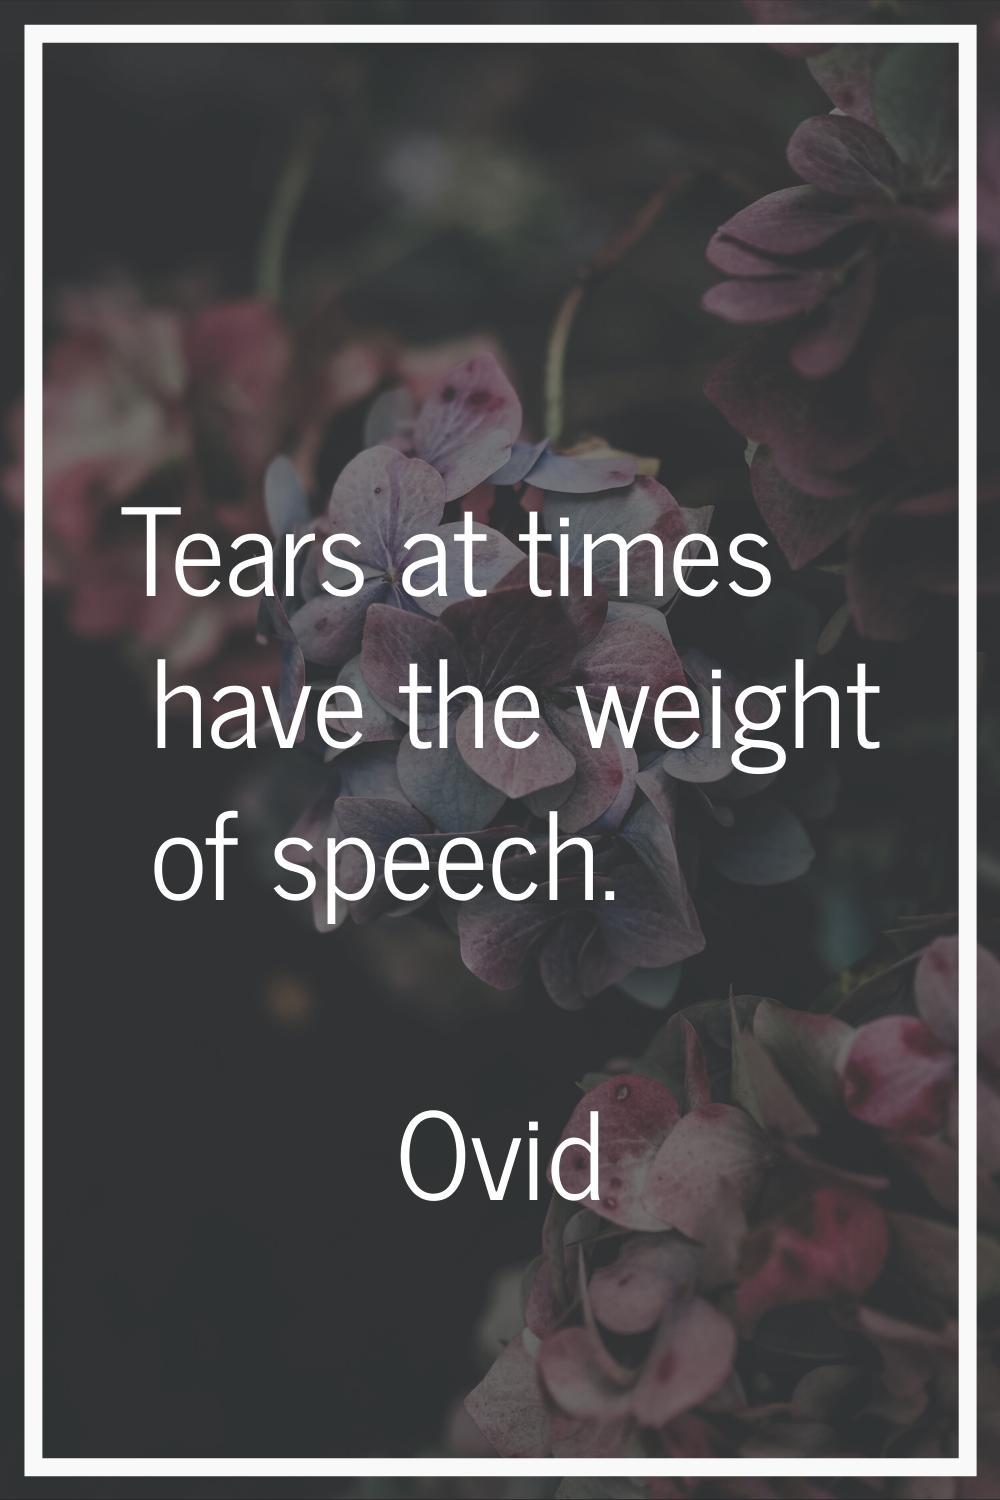 Tears at times have the weight of speech.